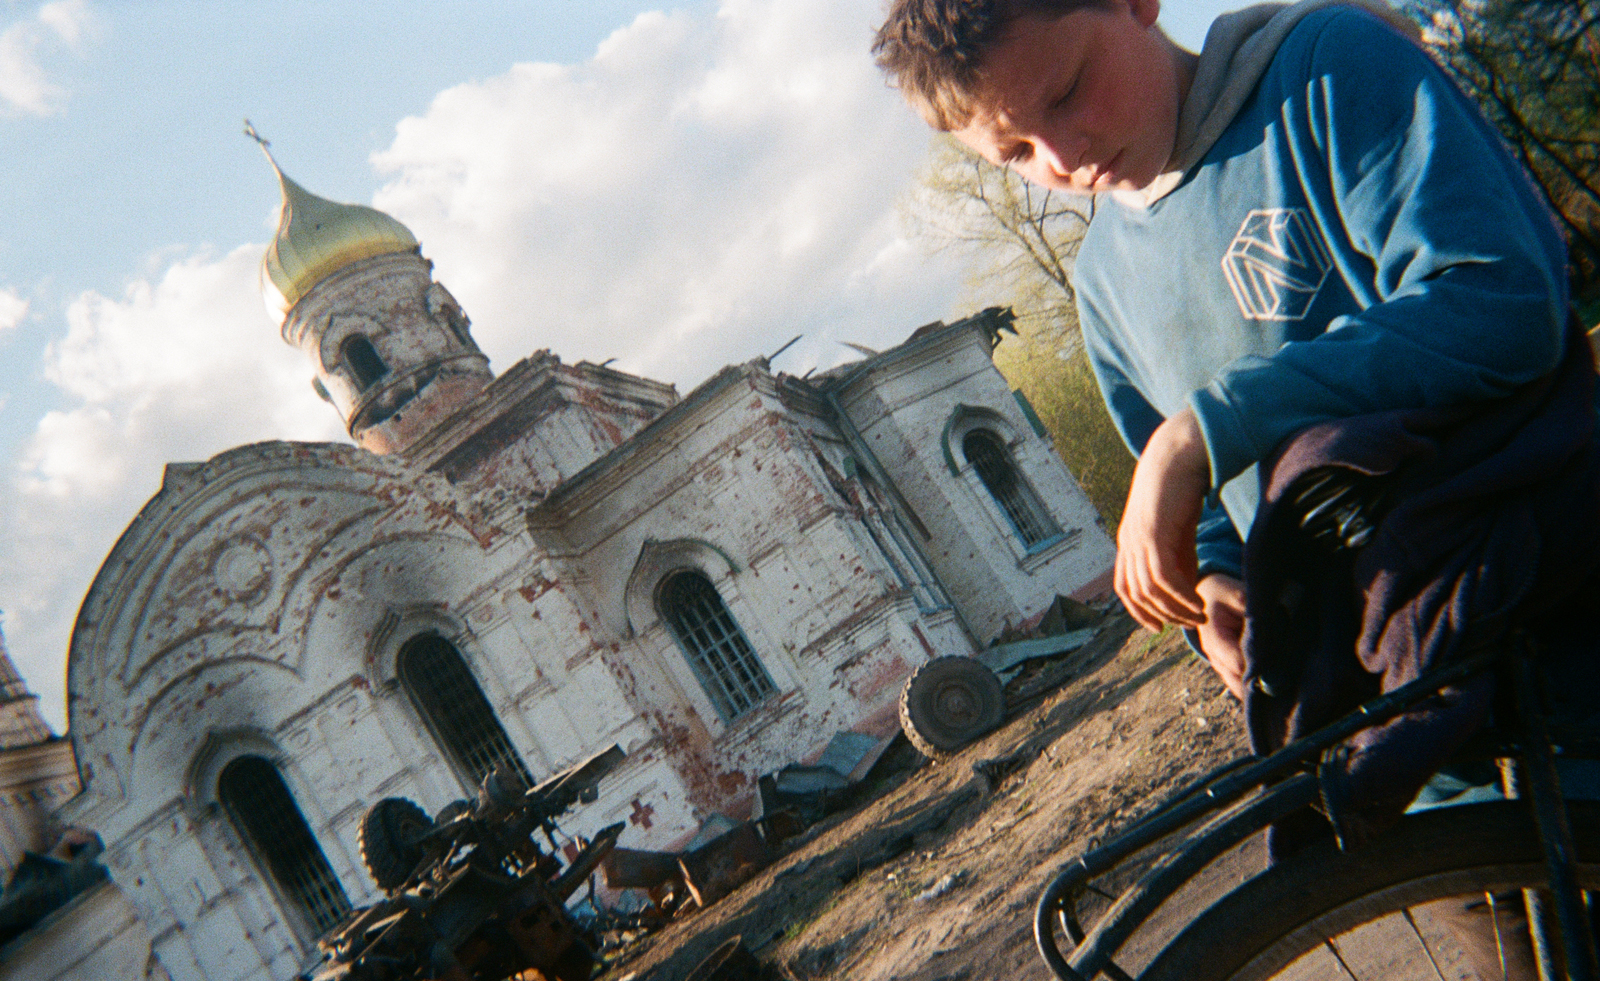 child with bike, and ruins and gun in background